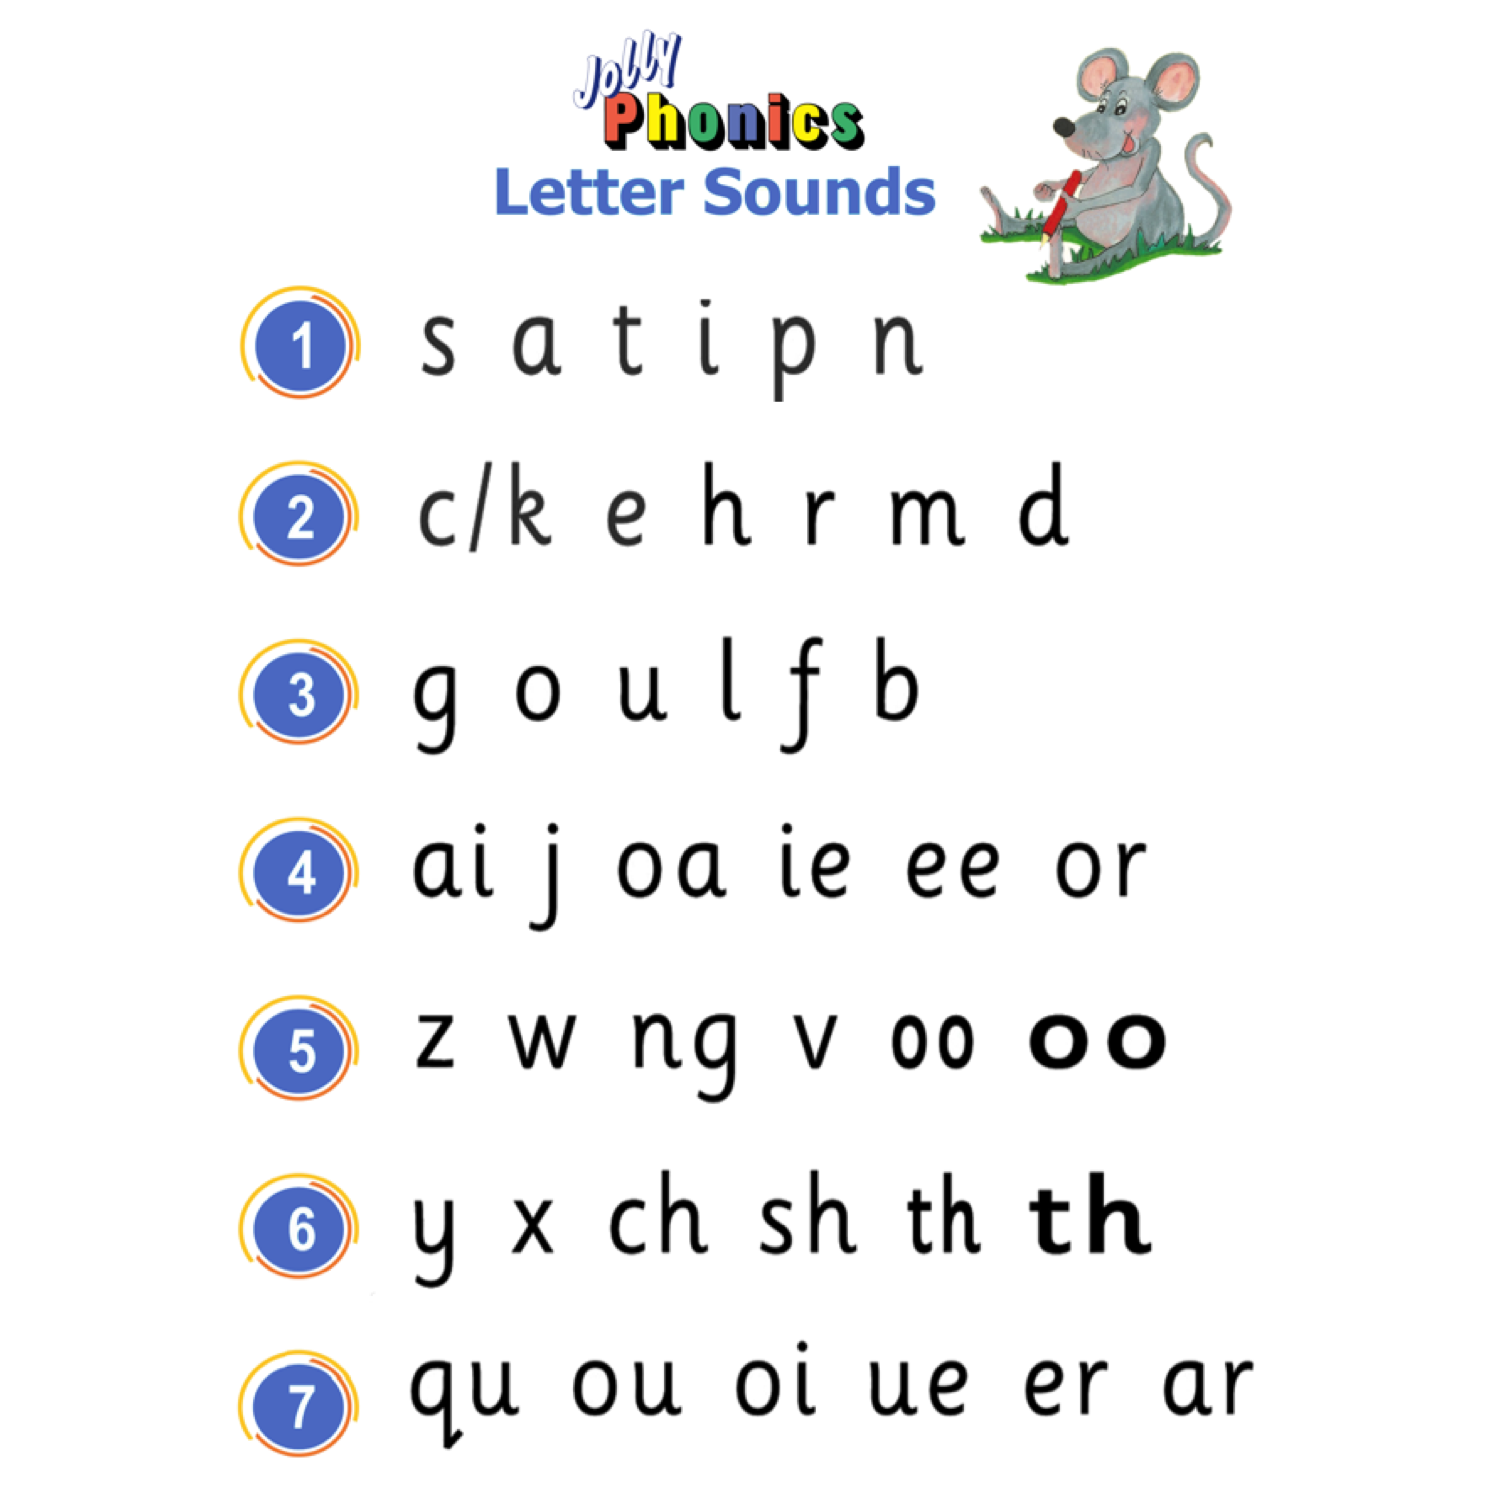 List Of Jolly Phonics Sounds In Order - img-Abdullah